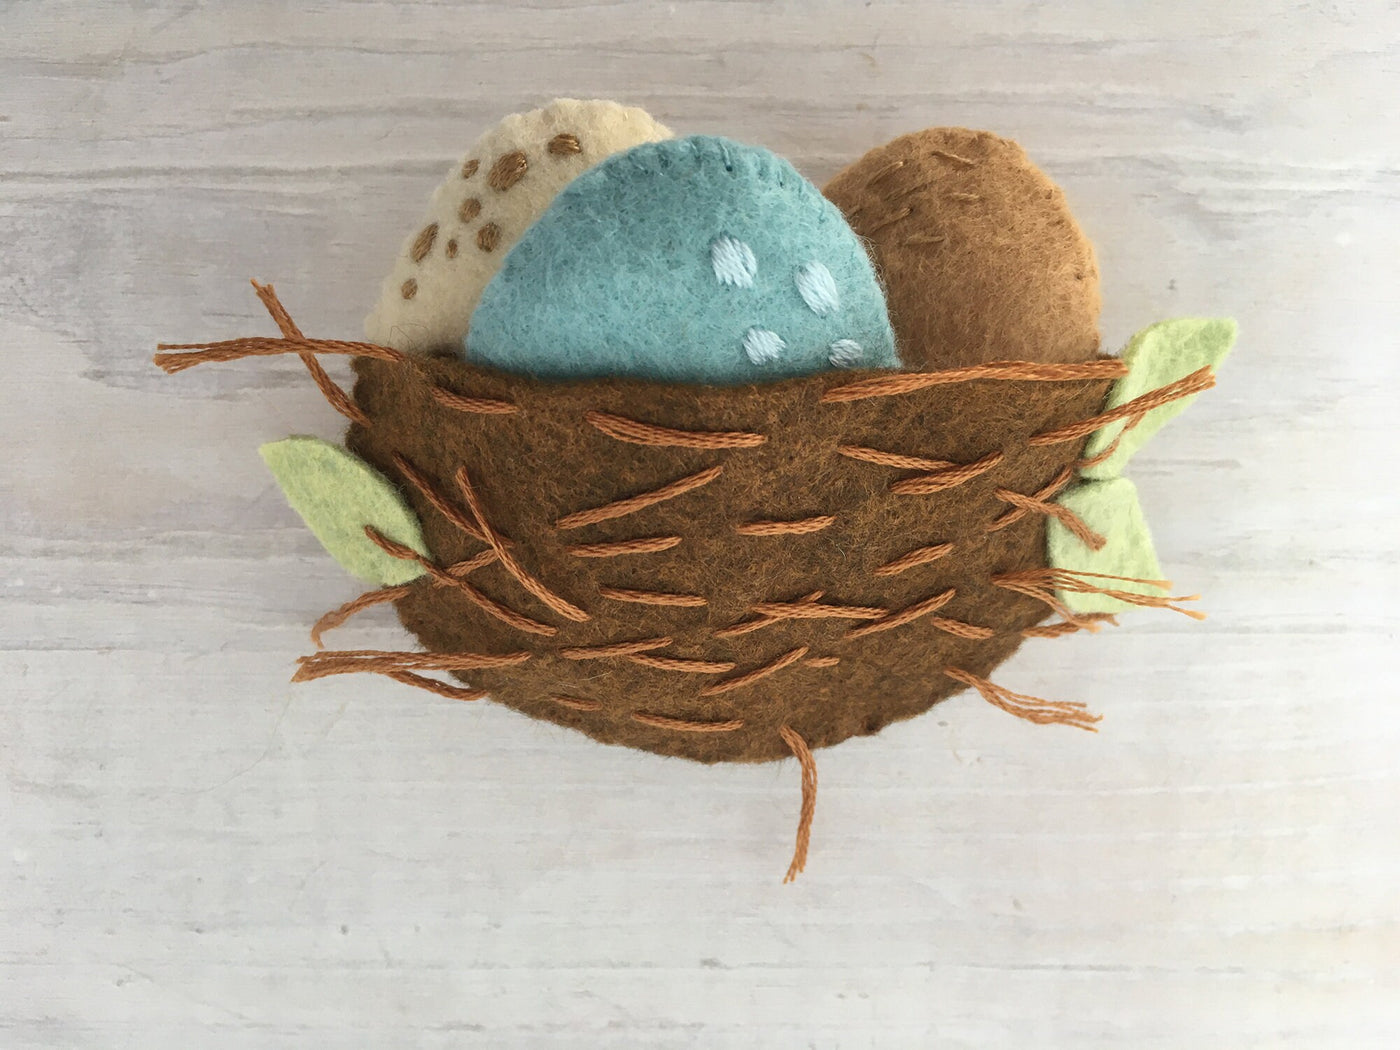 Nest, Eggs and Baby Birds felt plush sewing pattern